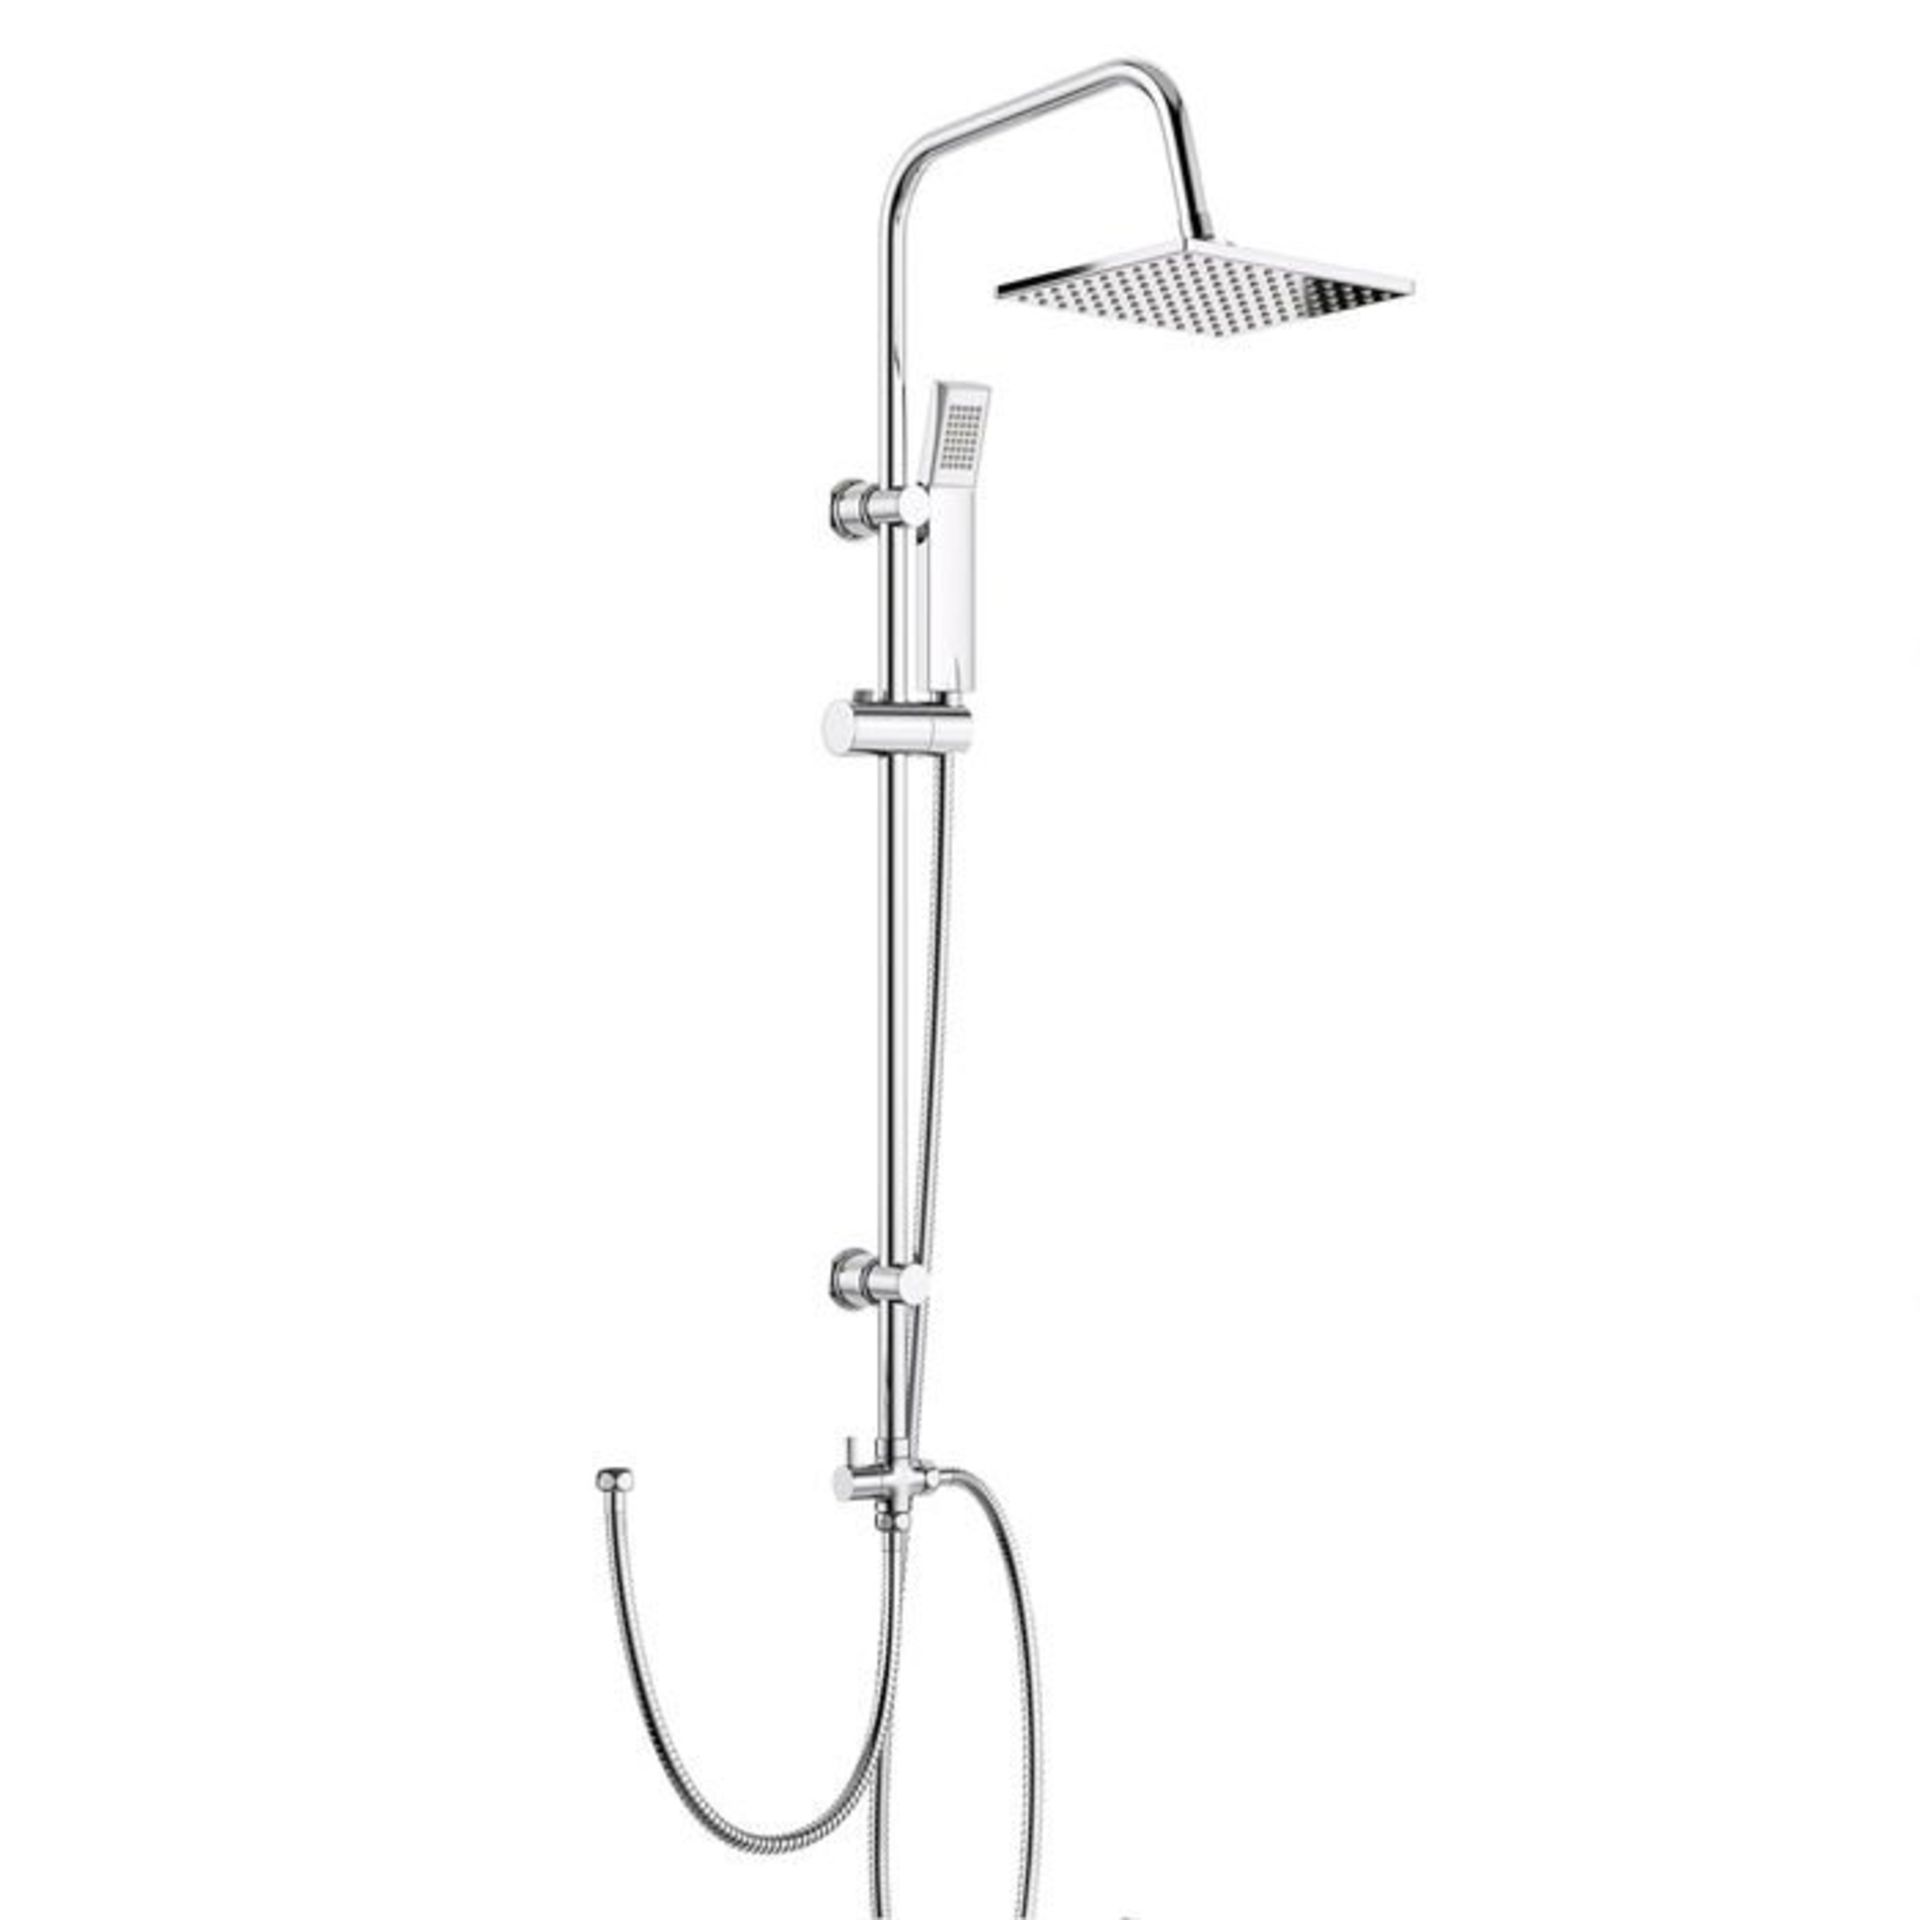 (G61) 200mm Square Head, Riser Rail & Handheld Kit Quality stainless steel shower head with Easy - Image 4 of 7